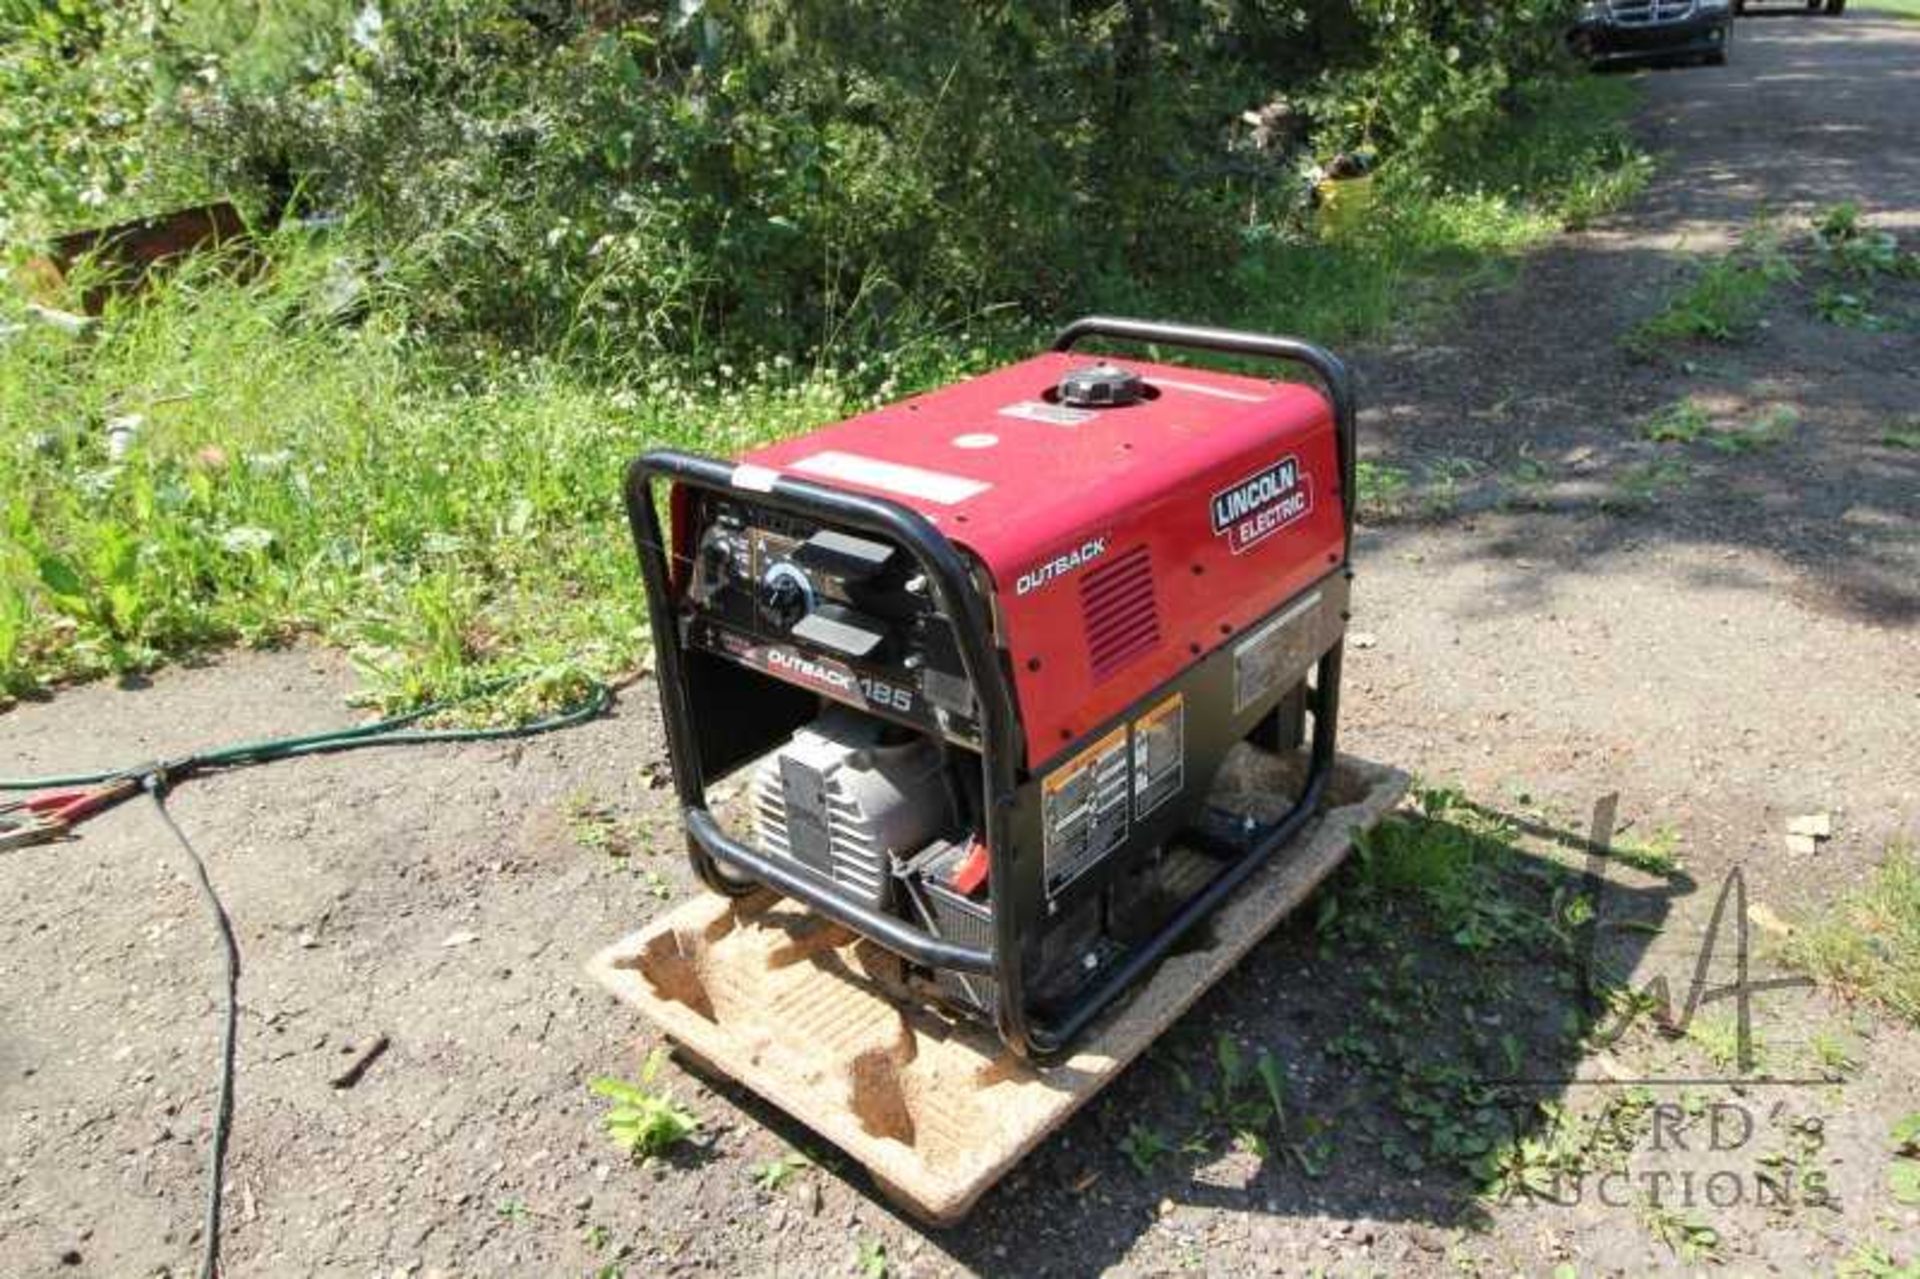 LINCOLN OUTBACK 185 5200W GENERATOR, ELECTRIC START, 0 HOURS ON METER, APPEARS UNUSED